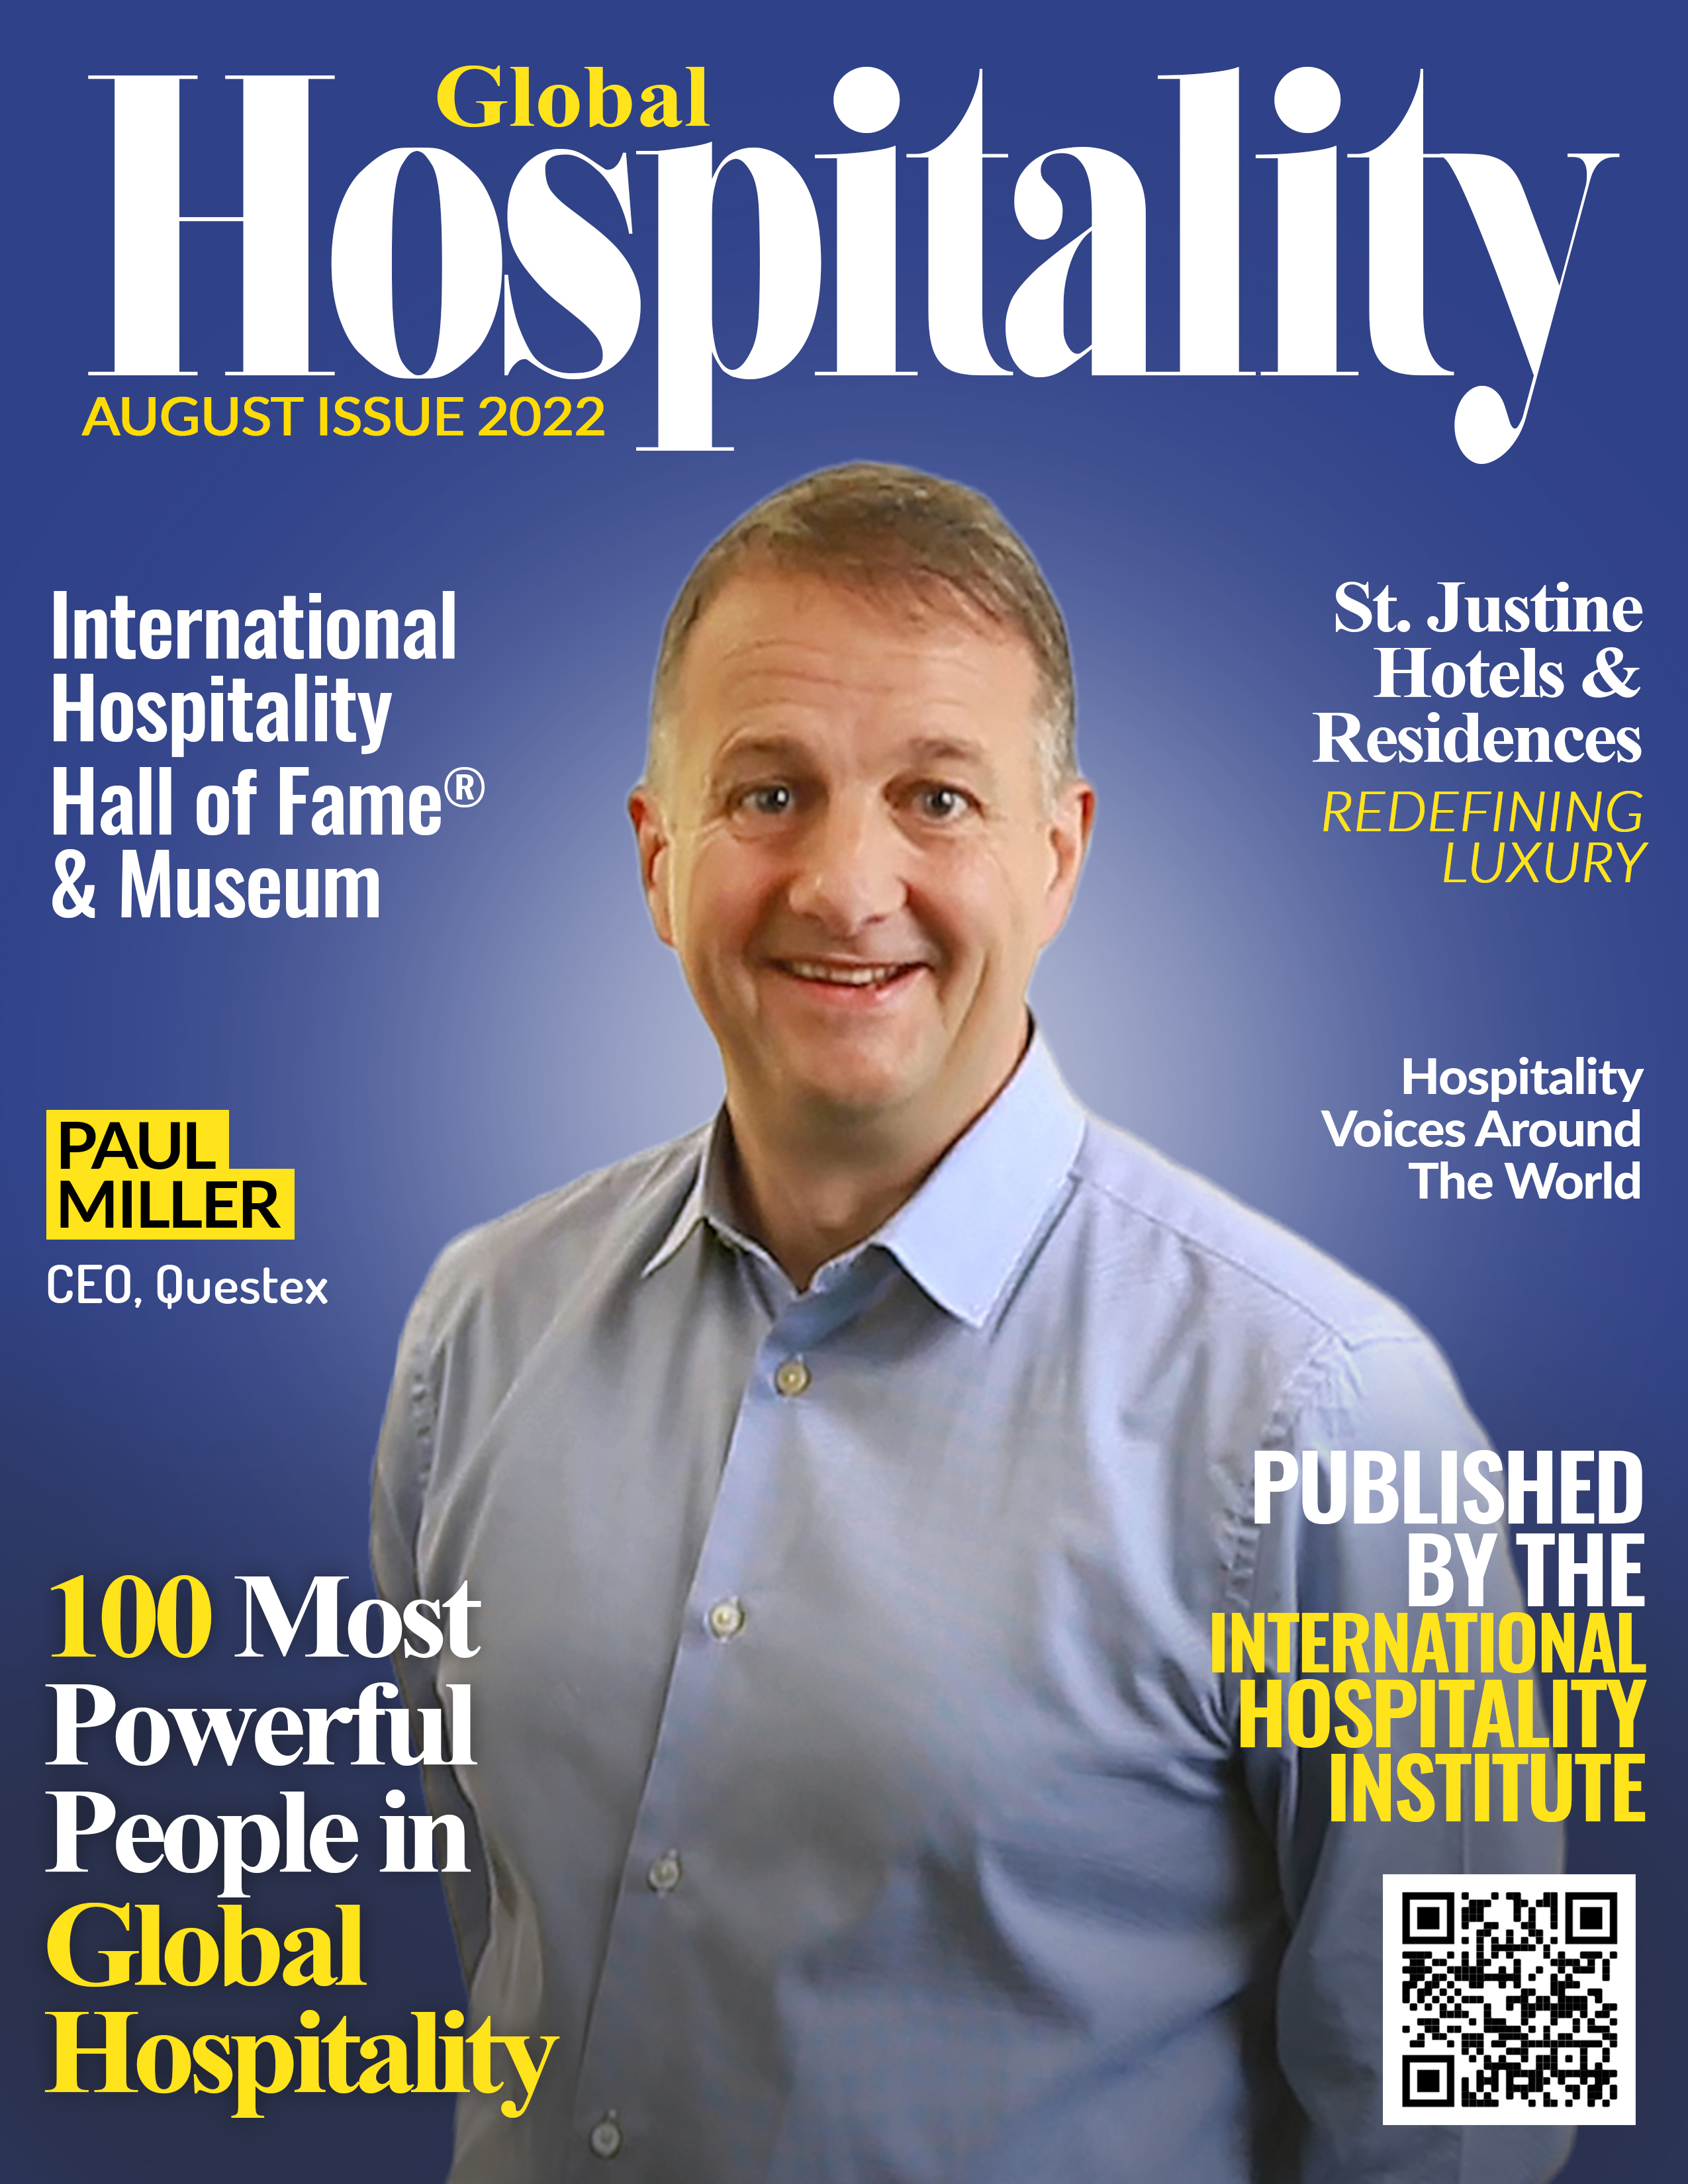 The International Hospitality Institute Names Paul Miller, Questex’s CEO, One of the 100 Most Powerful People in Global Hospitality: The International Hospitality Institute Names Paul Miller, Questex’s CEO, One of the 100 Most Powerful People in Global Hospitality